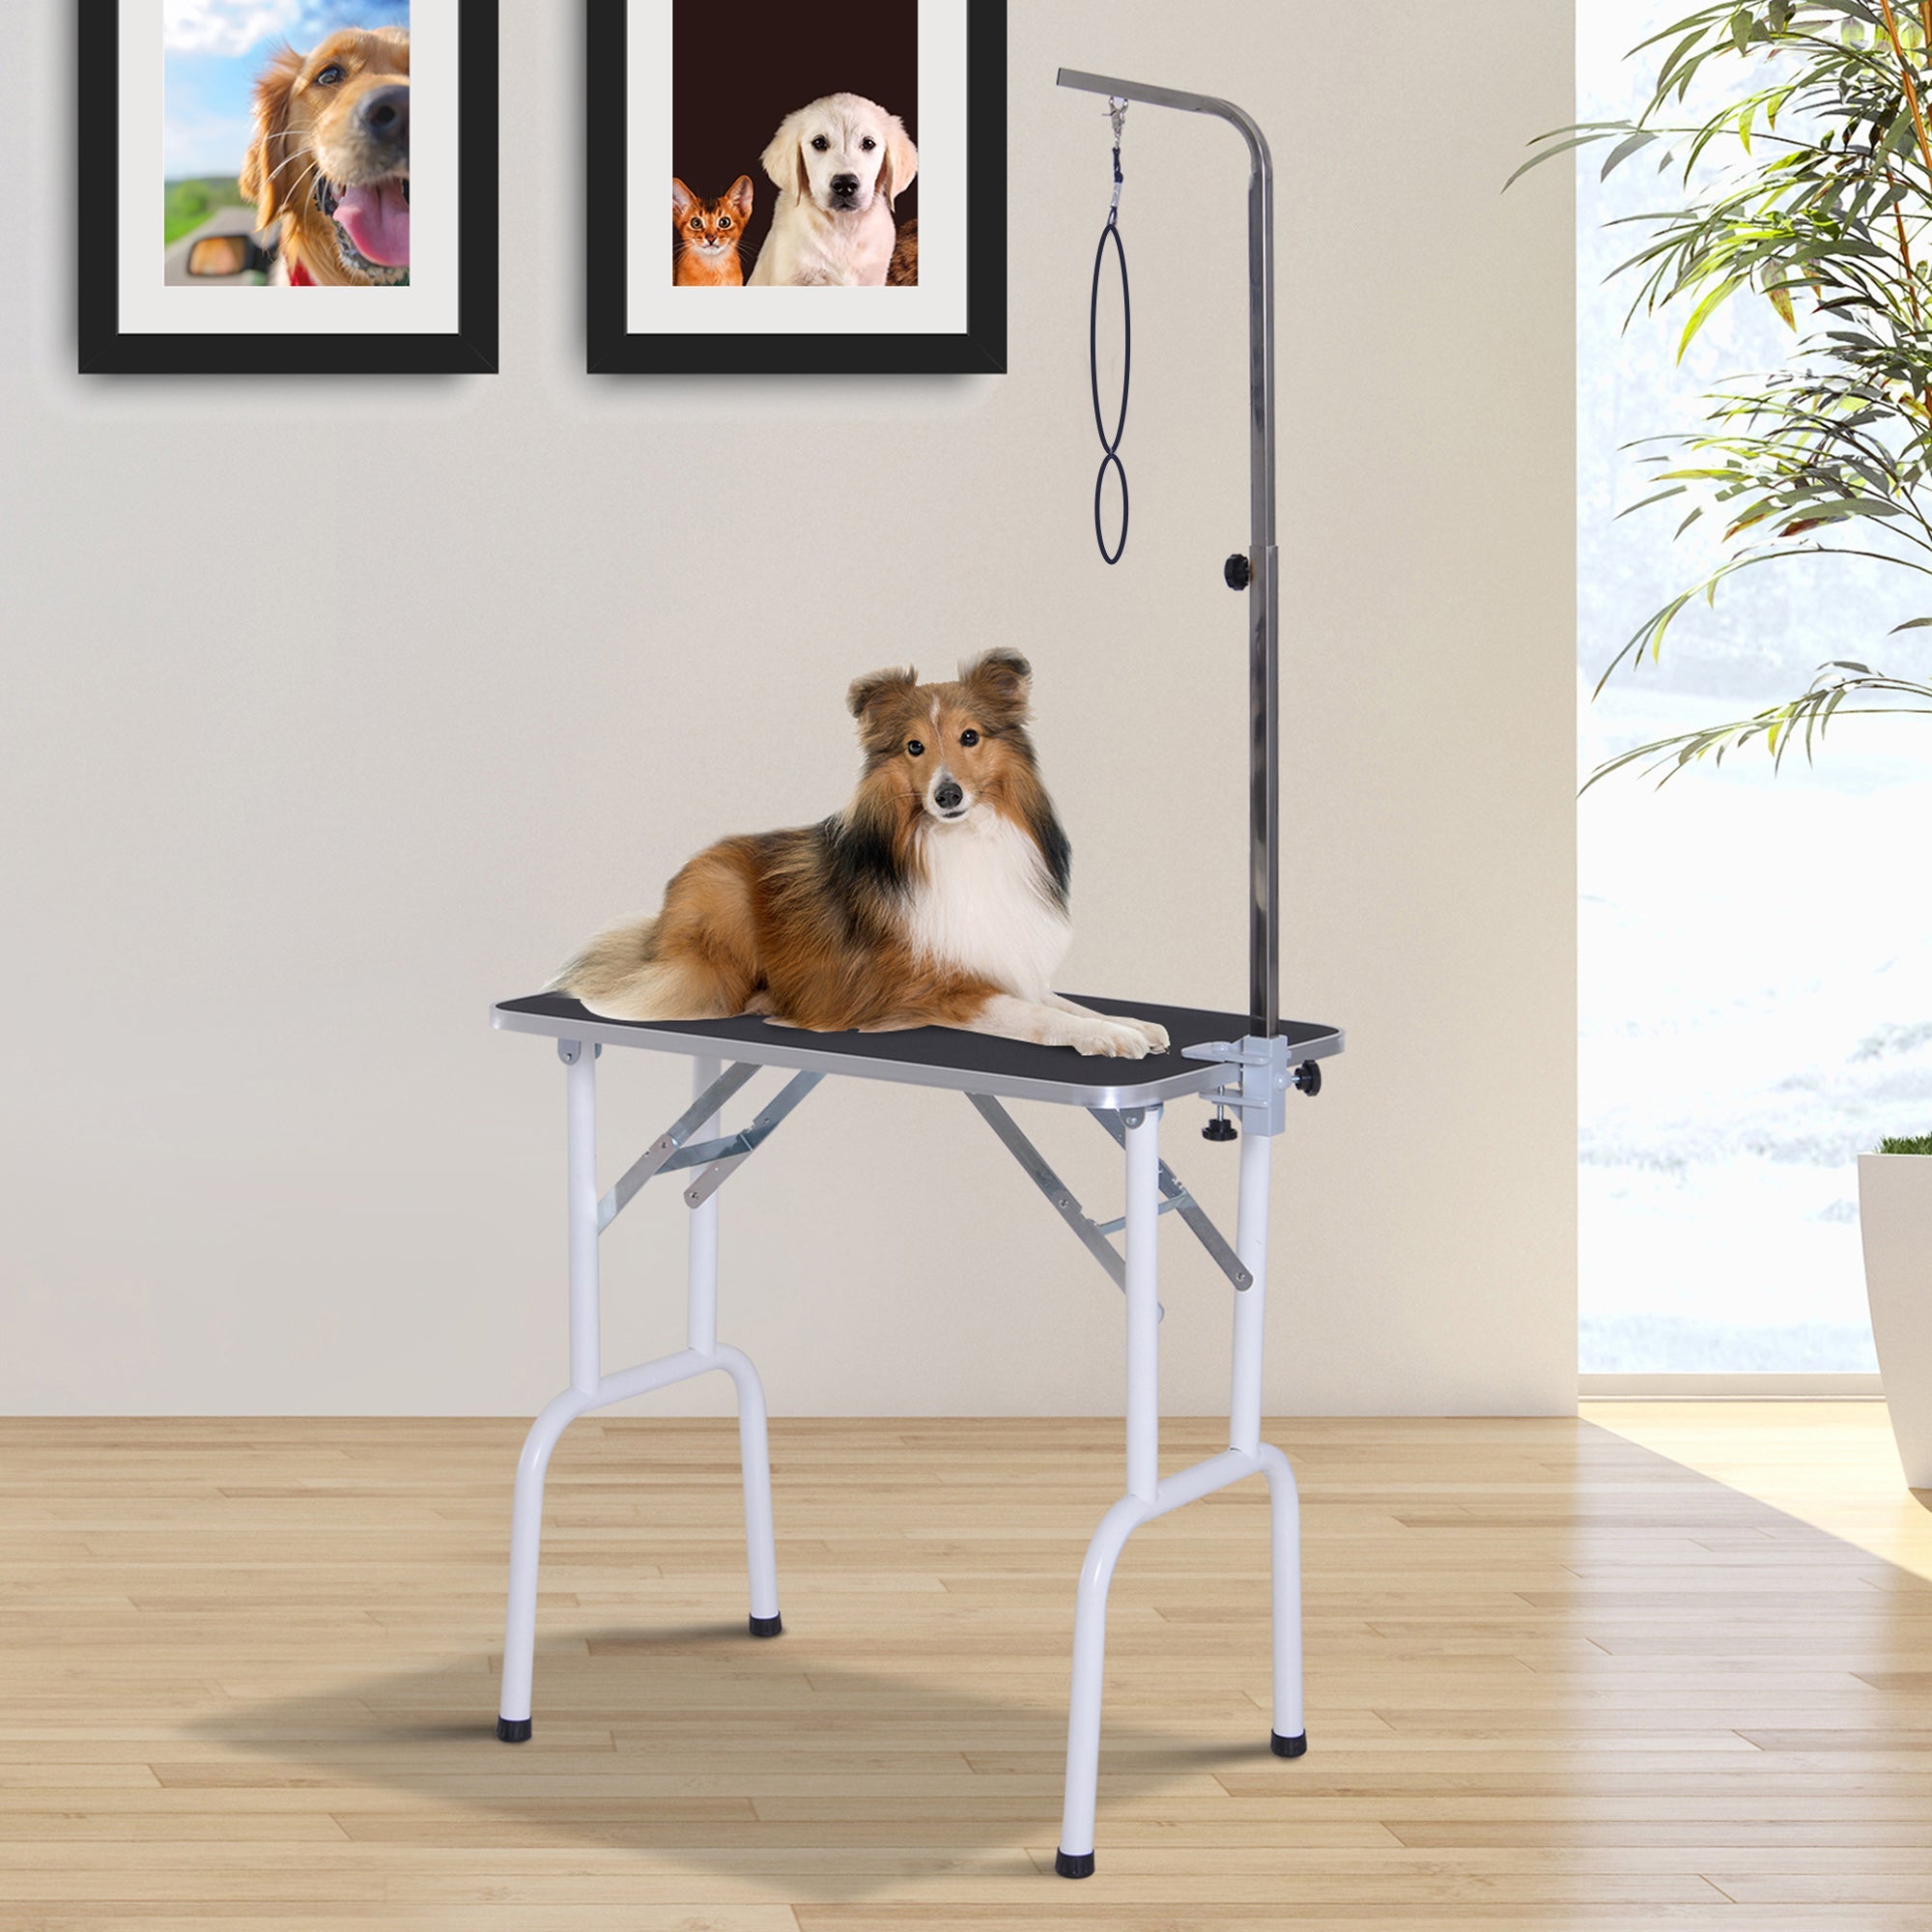 Folding Pet Grooming Table for Small Dogs with Adjustable Grooming Arm Max Load 30 KG, 81x48.5x80 cm-1